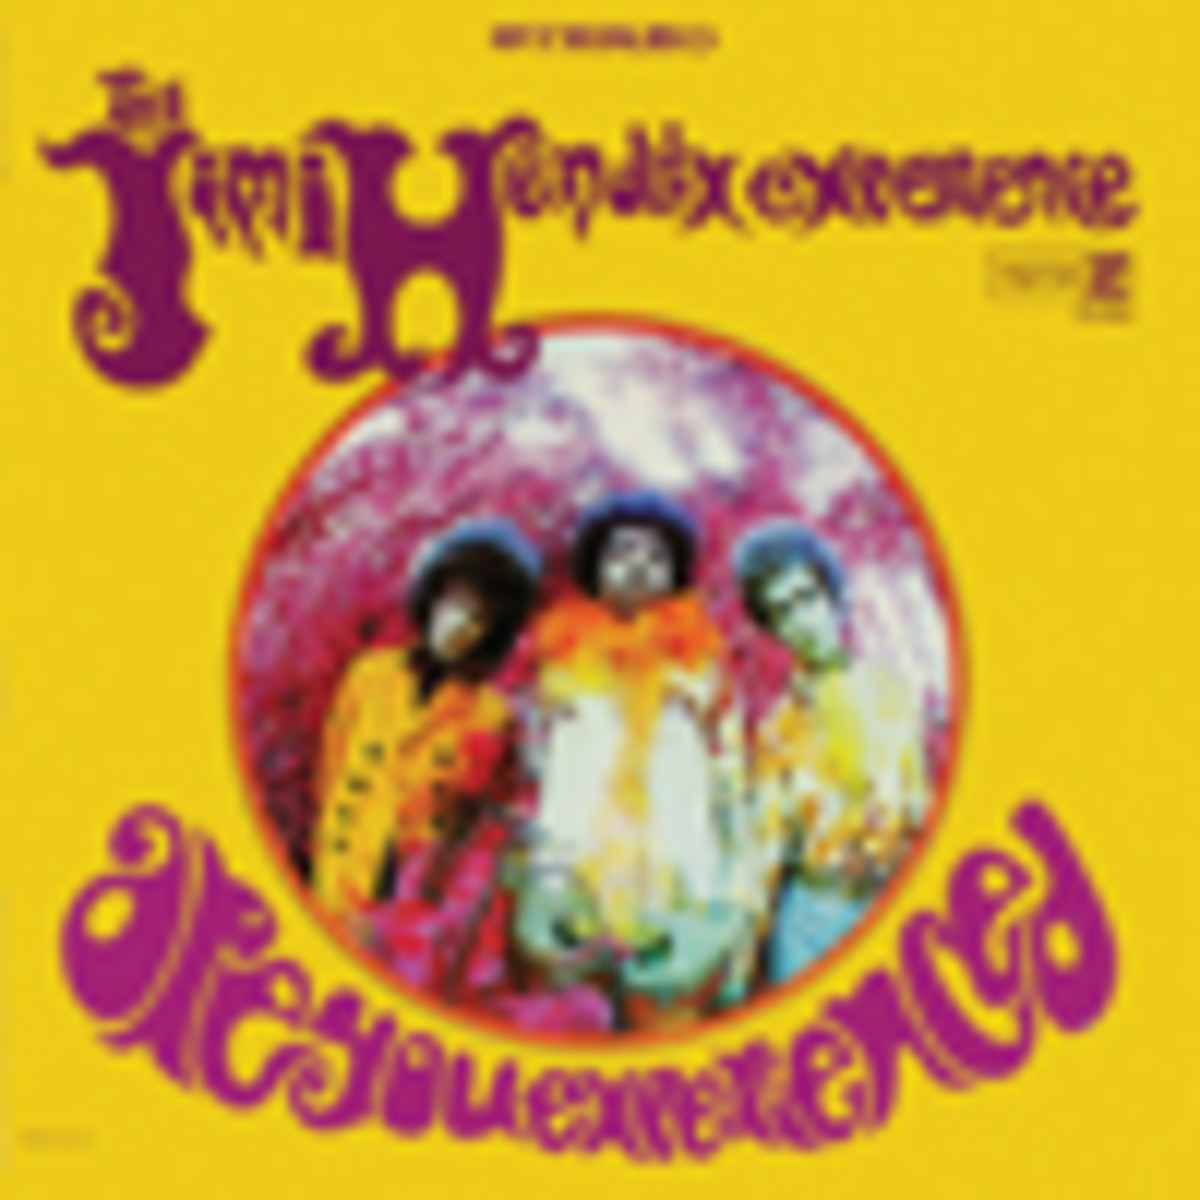 Jimi Hendrix Experience Are You Experienced?